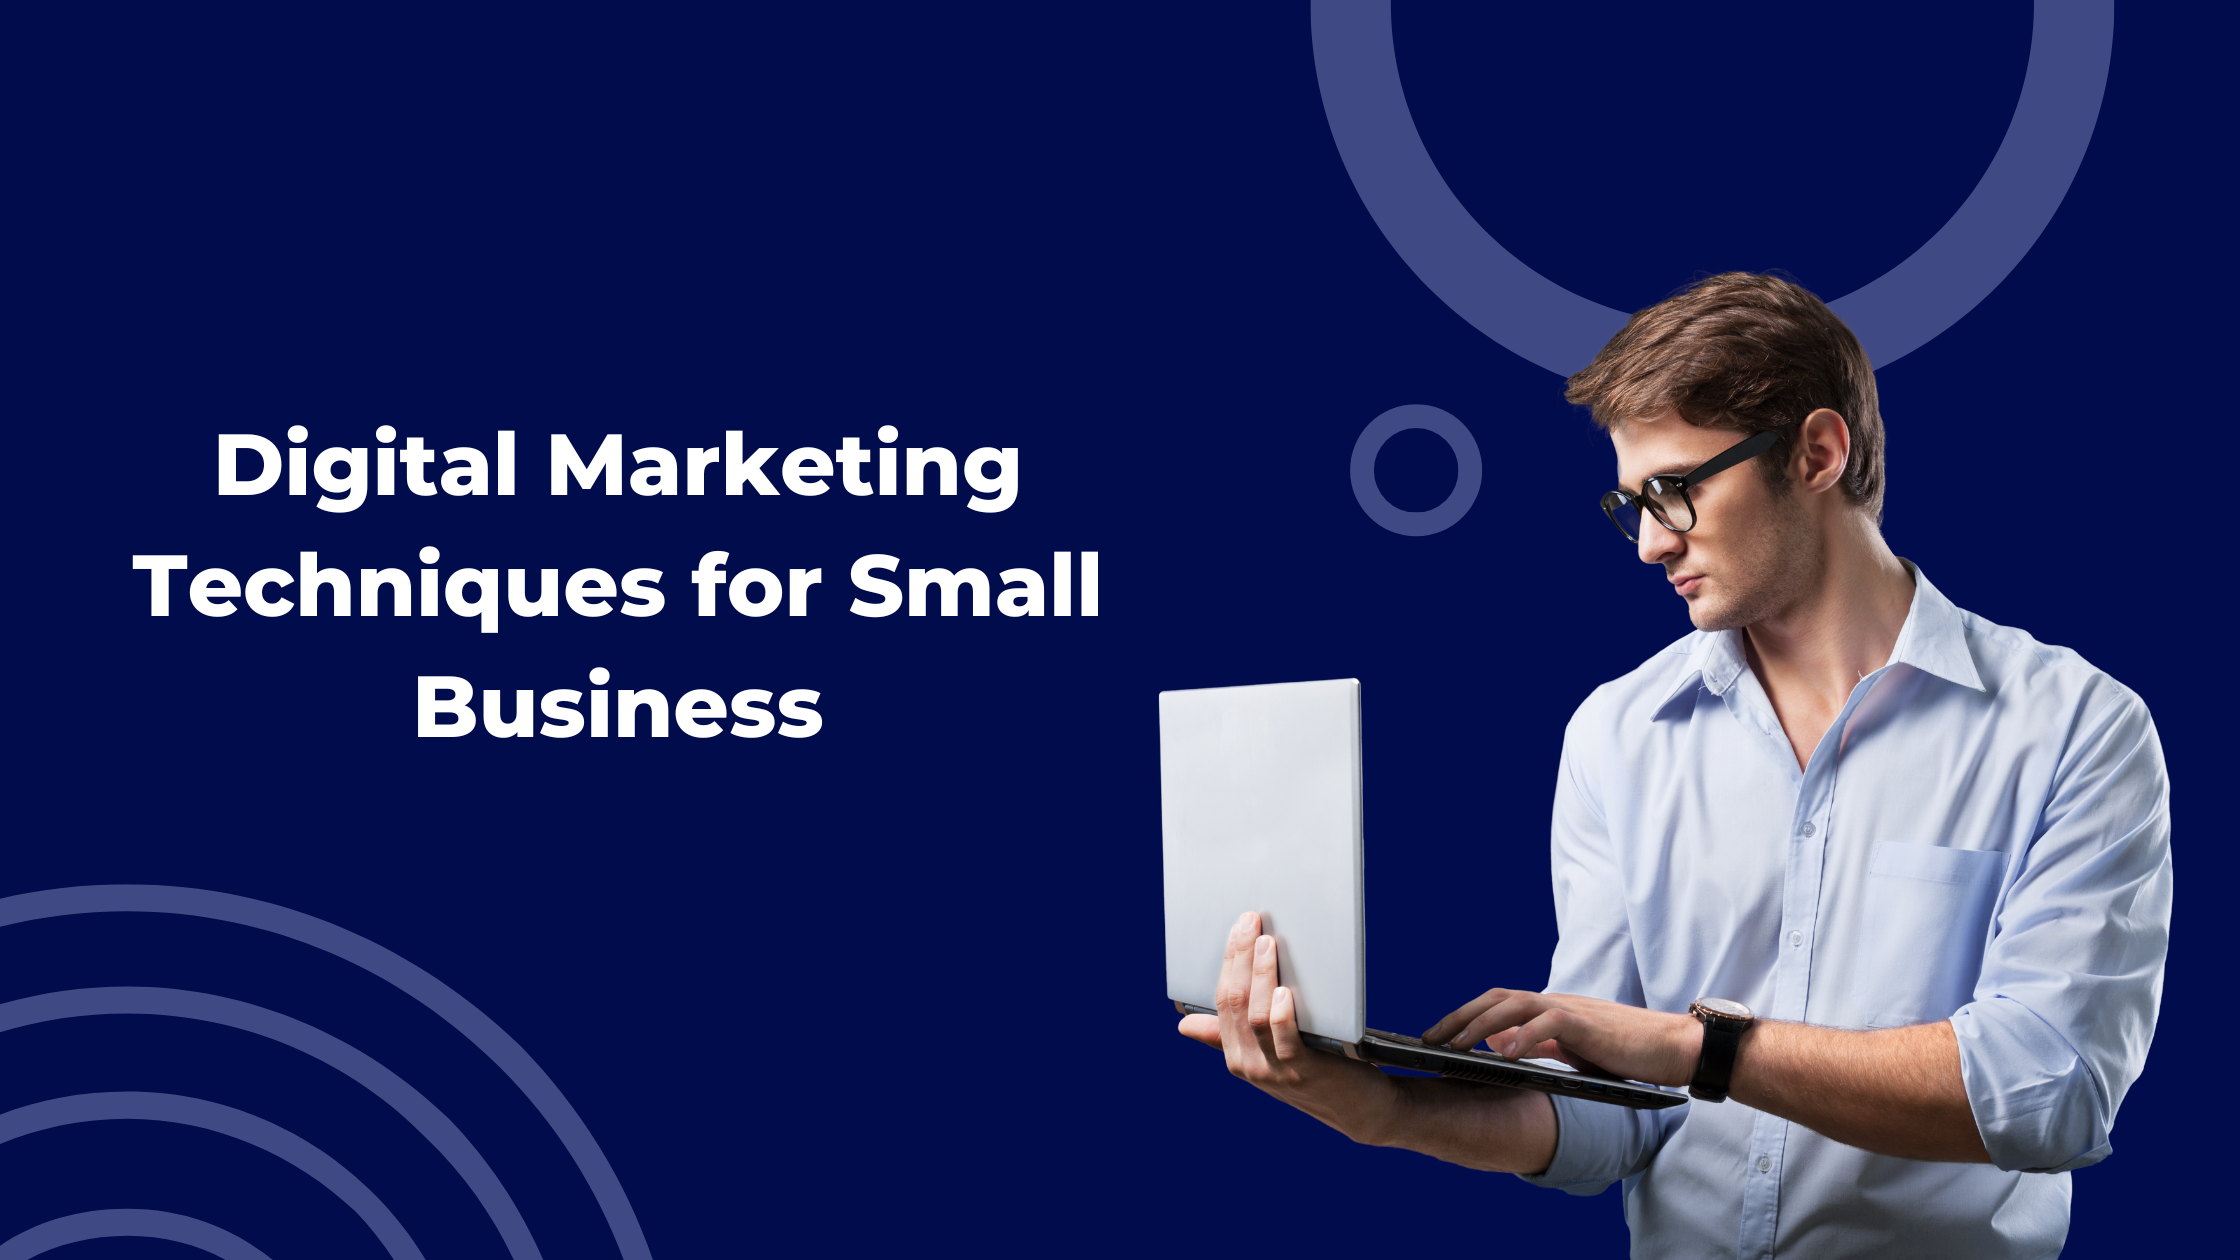 Digital Marketing Techniques for Small Business